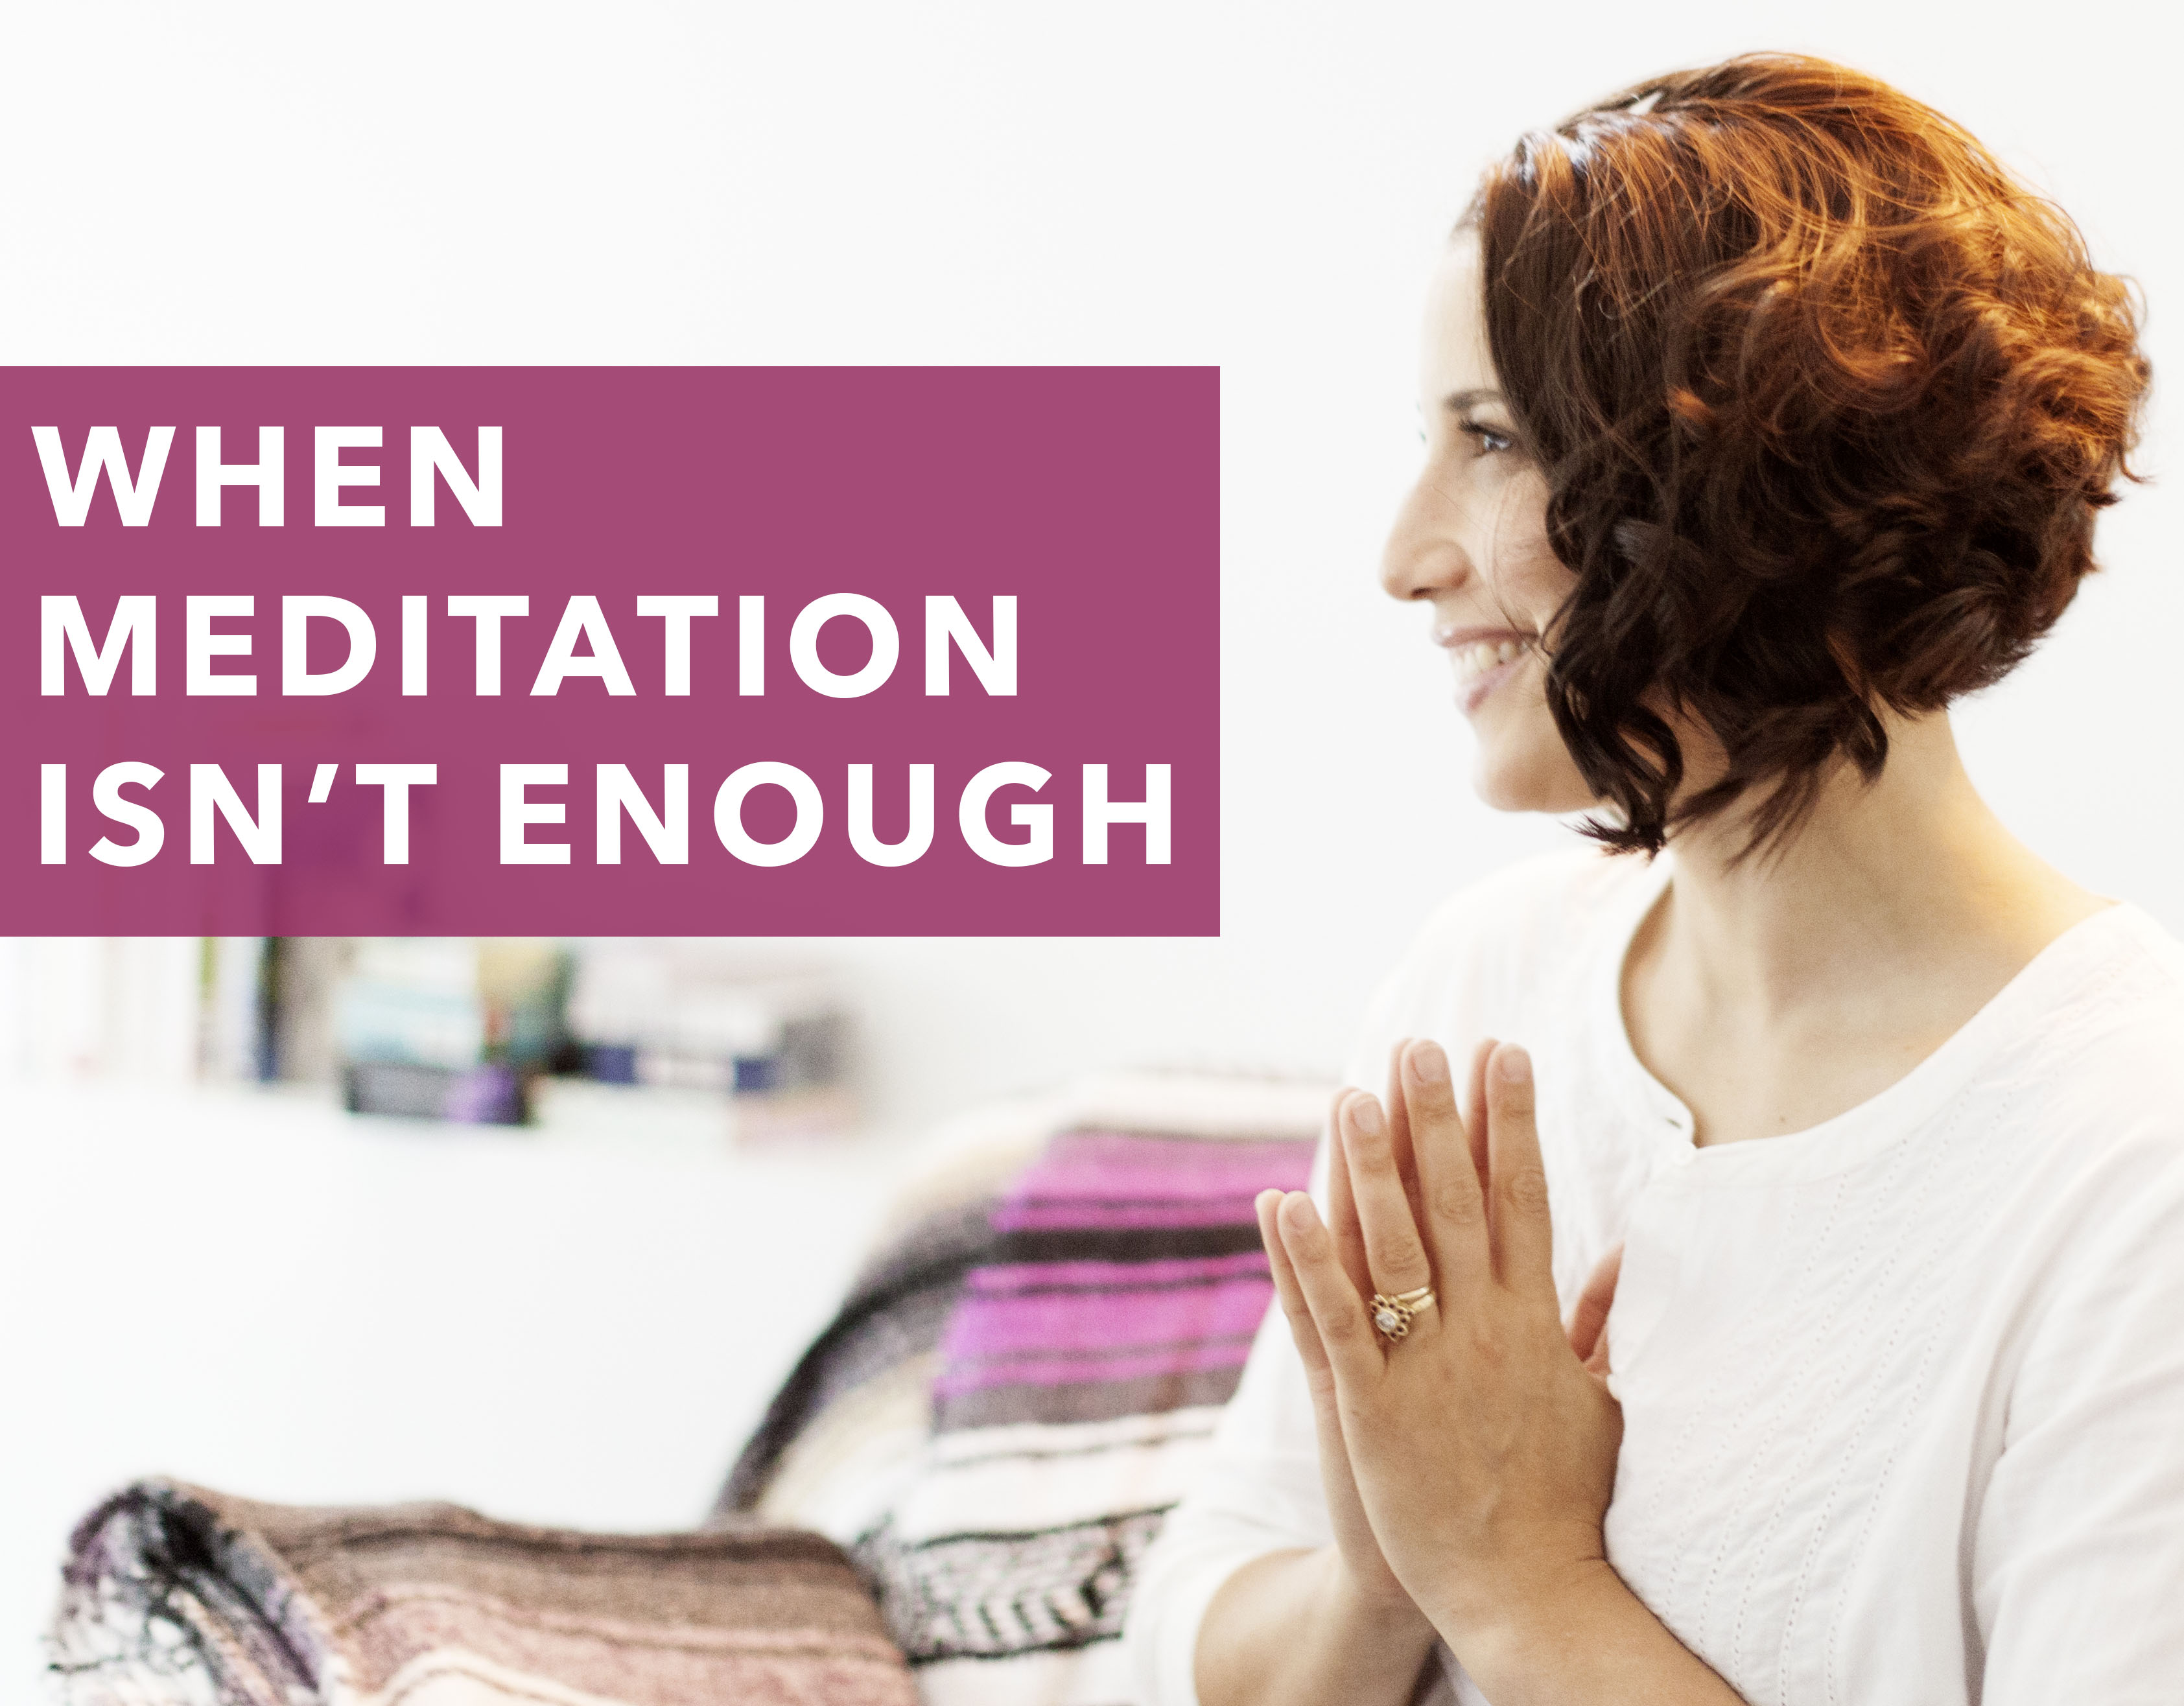  Thinking Outside the Meditation Box: 7 Simple Ways for a Busy Mom to De-Stress